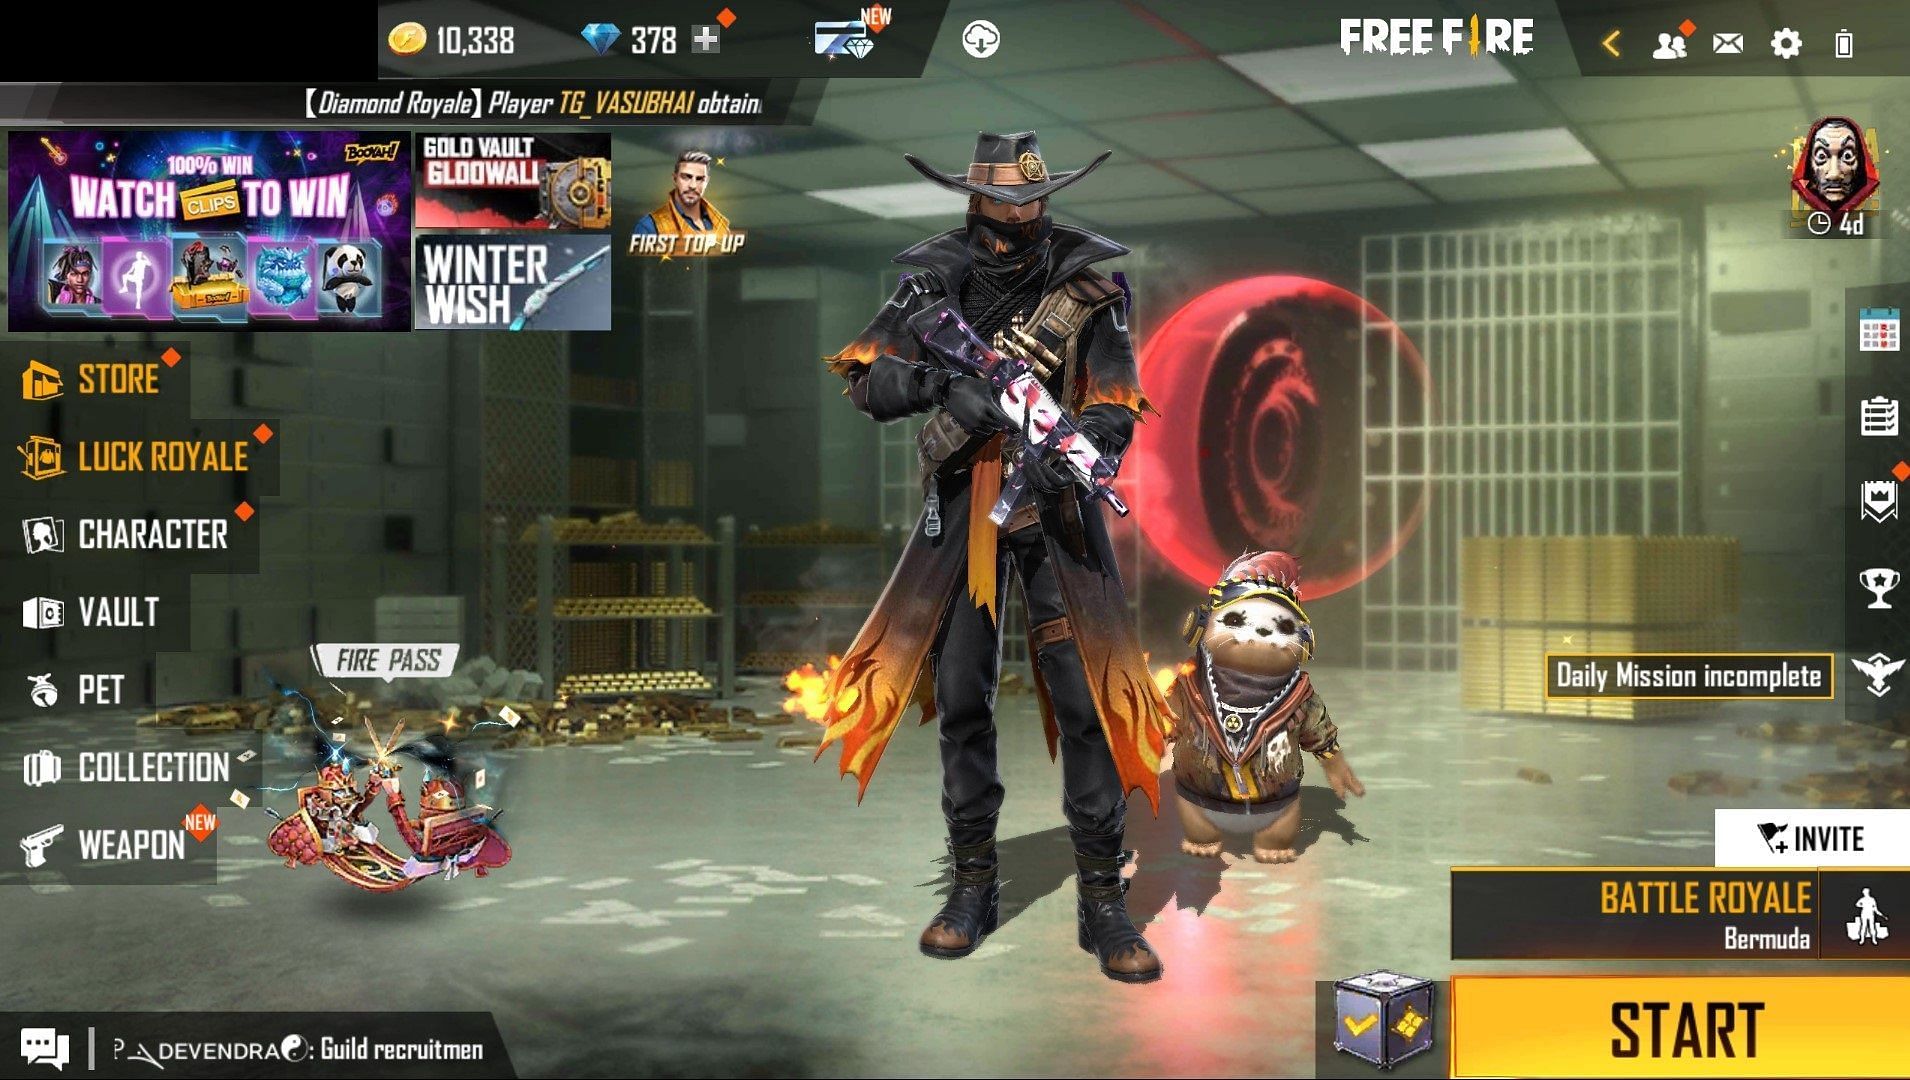 Click on the + icon (Image via Free Fire)